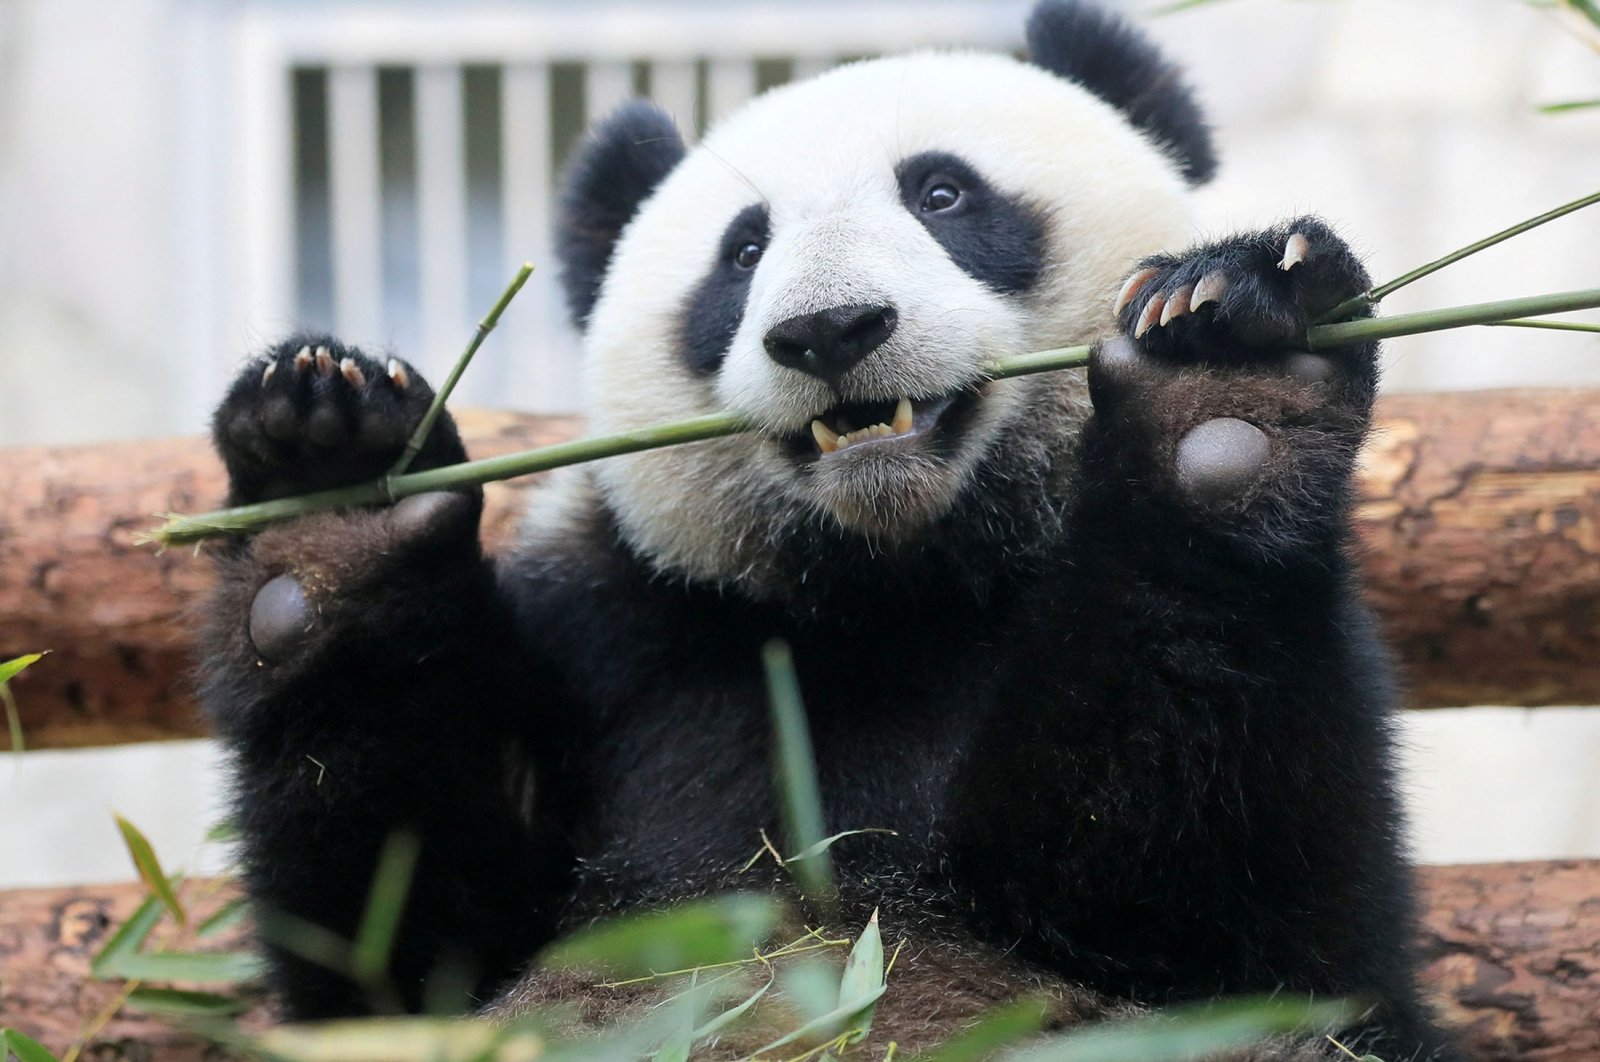 A giant panda eats bamboo inside an enclosure at the Moscow Zoo on a hot summer day in the capital Moscow, Russia, June 7, 2019. (Reuters Photo)